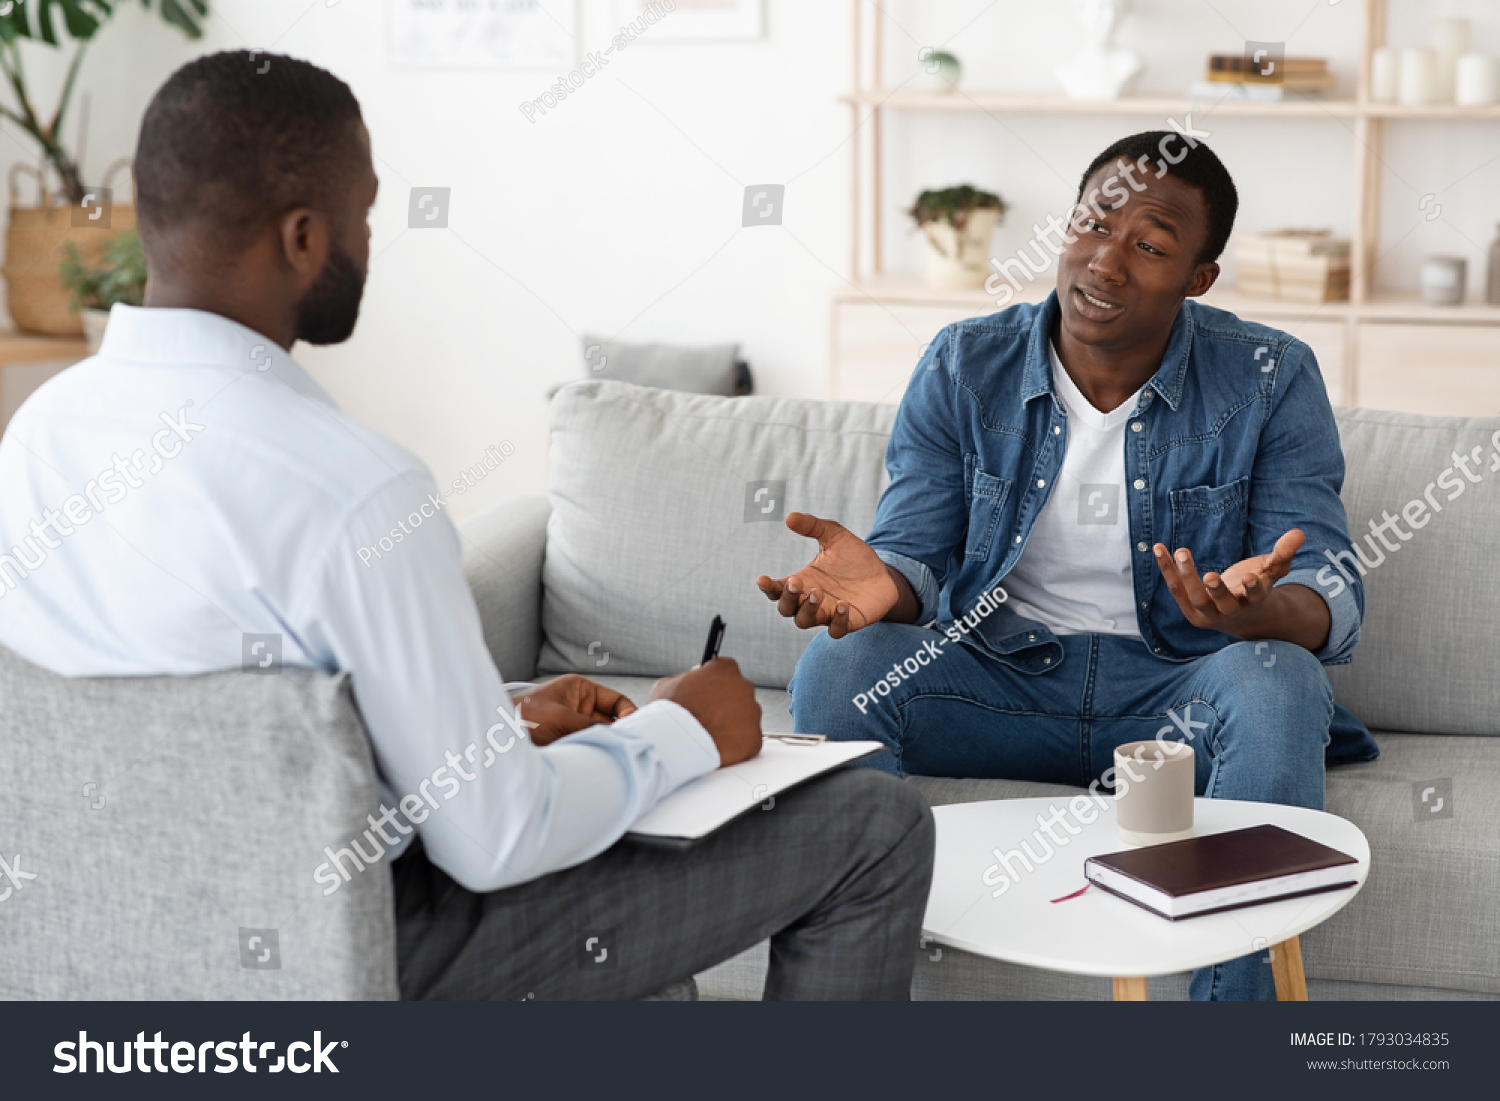 Stressed black man explaining his problems to psychologist at individual therapy session at office, copy space #1793034835